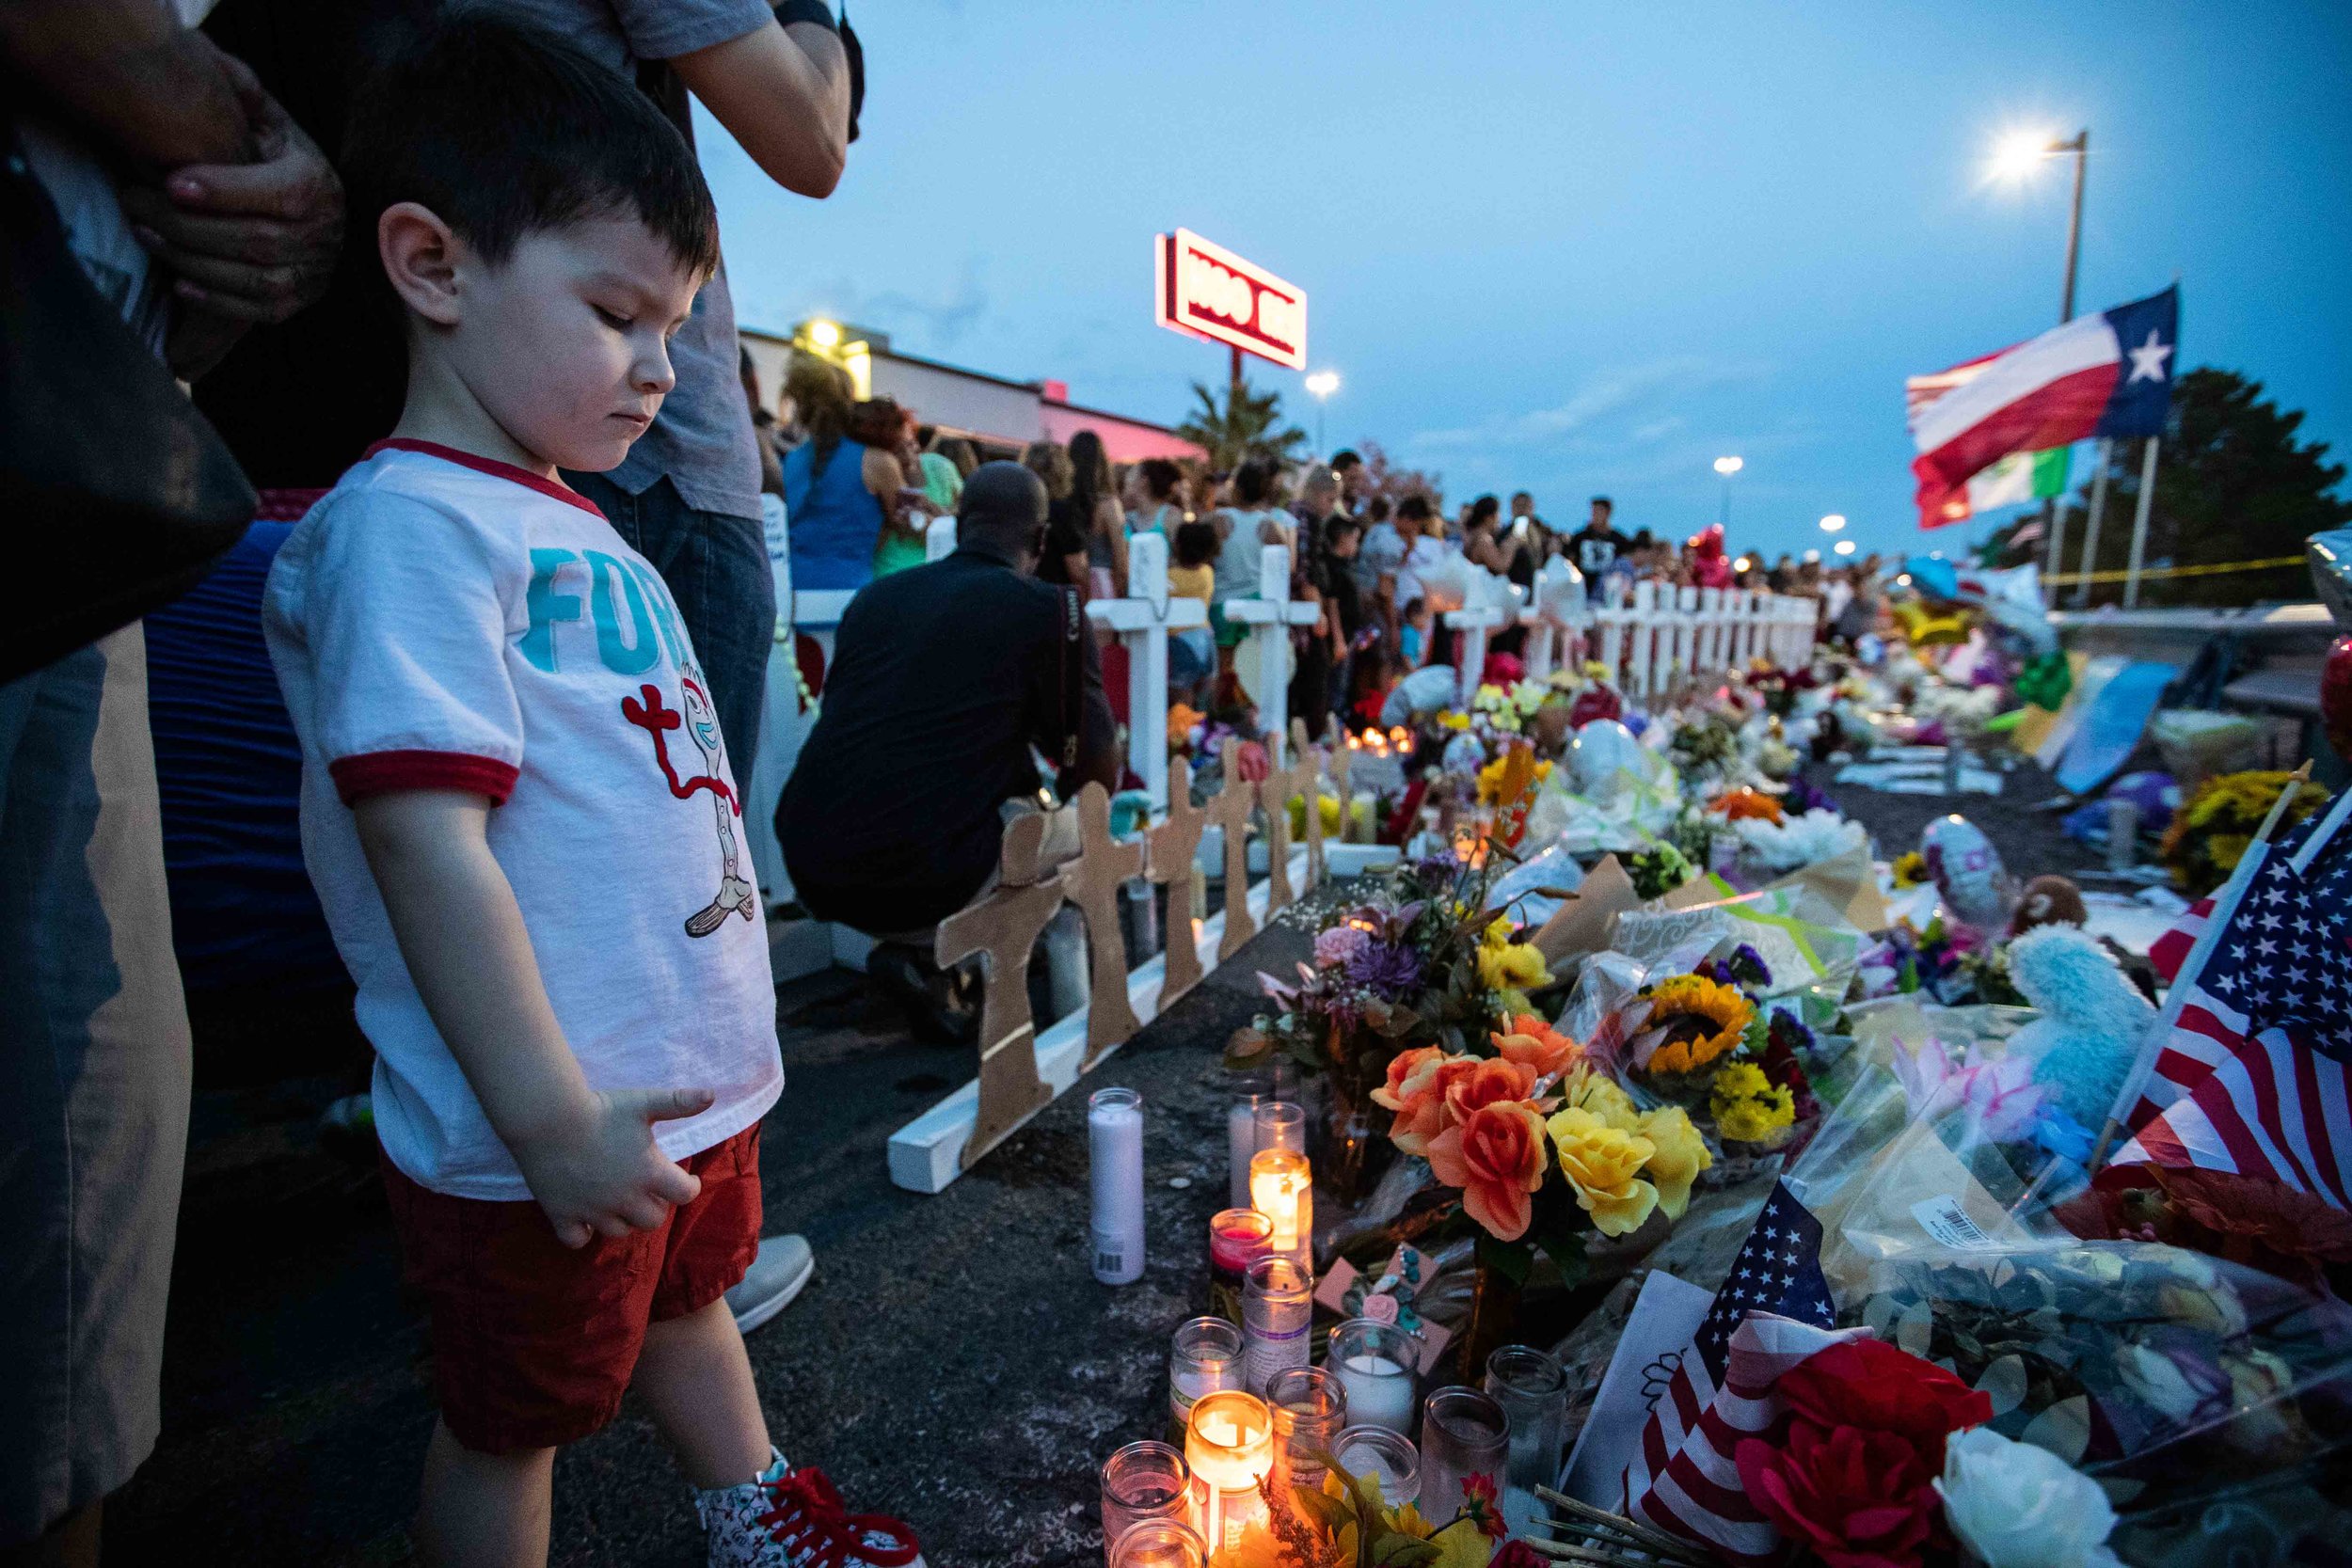  Roy Cedillo, 4, looks at some of the candles, flowers and flags that were placed on the scene to honor the victims of a mass shooting occurred in Walmart las Saturday morning in El Paso on Monday, August 5, 2019. 